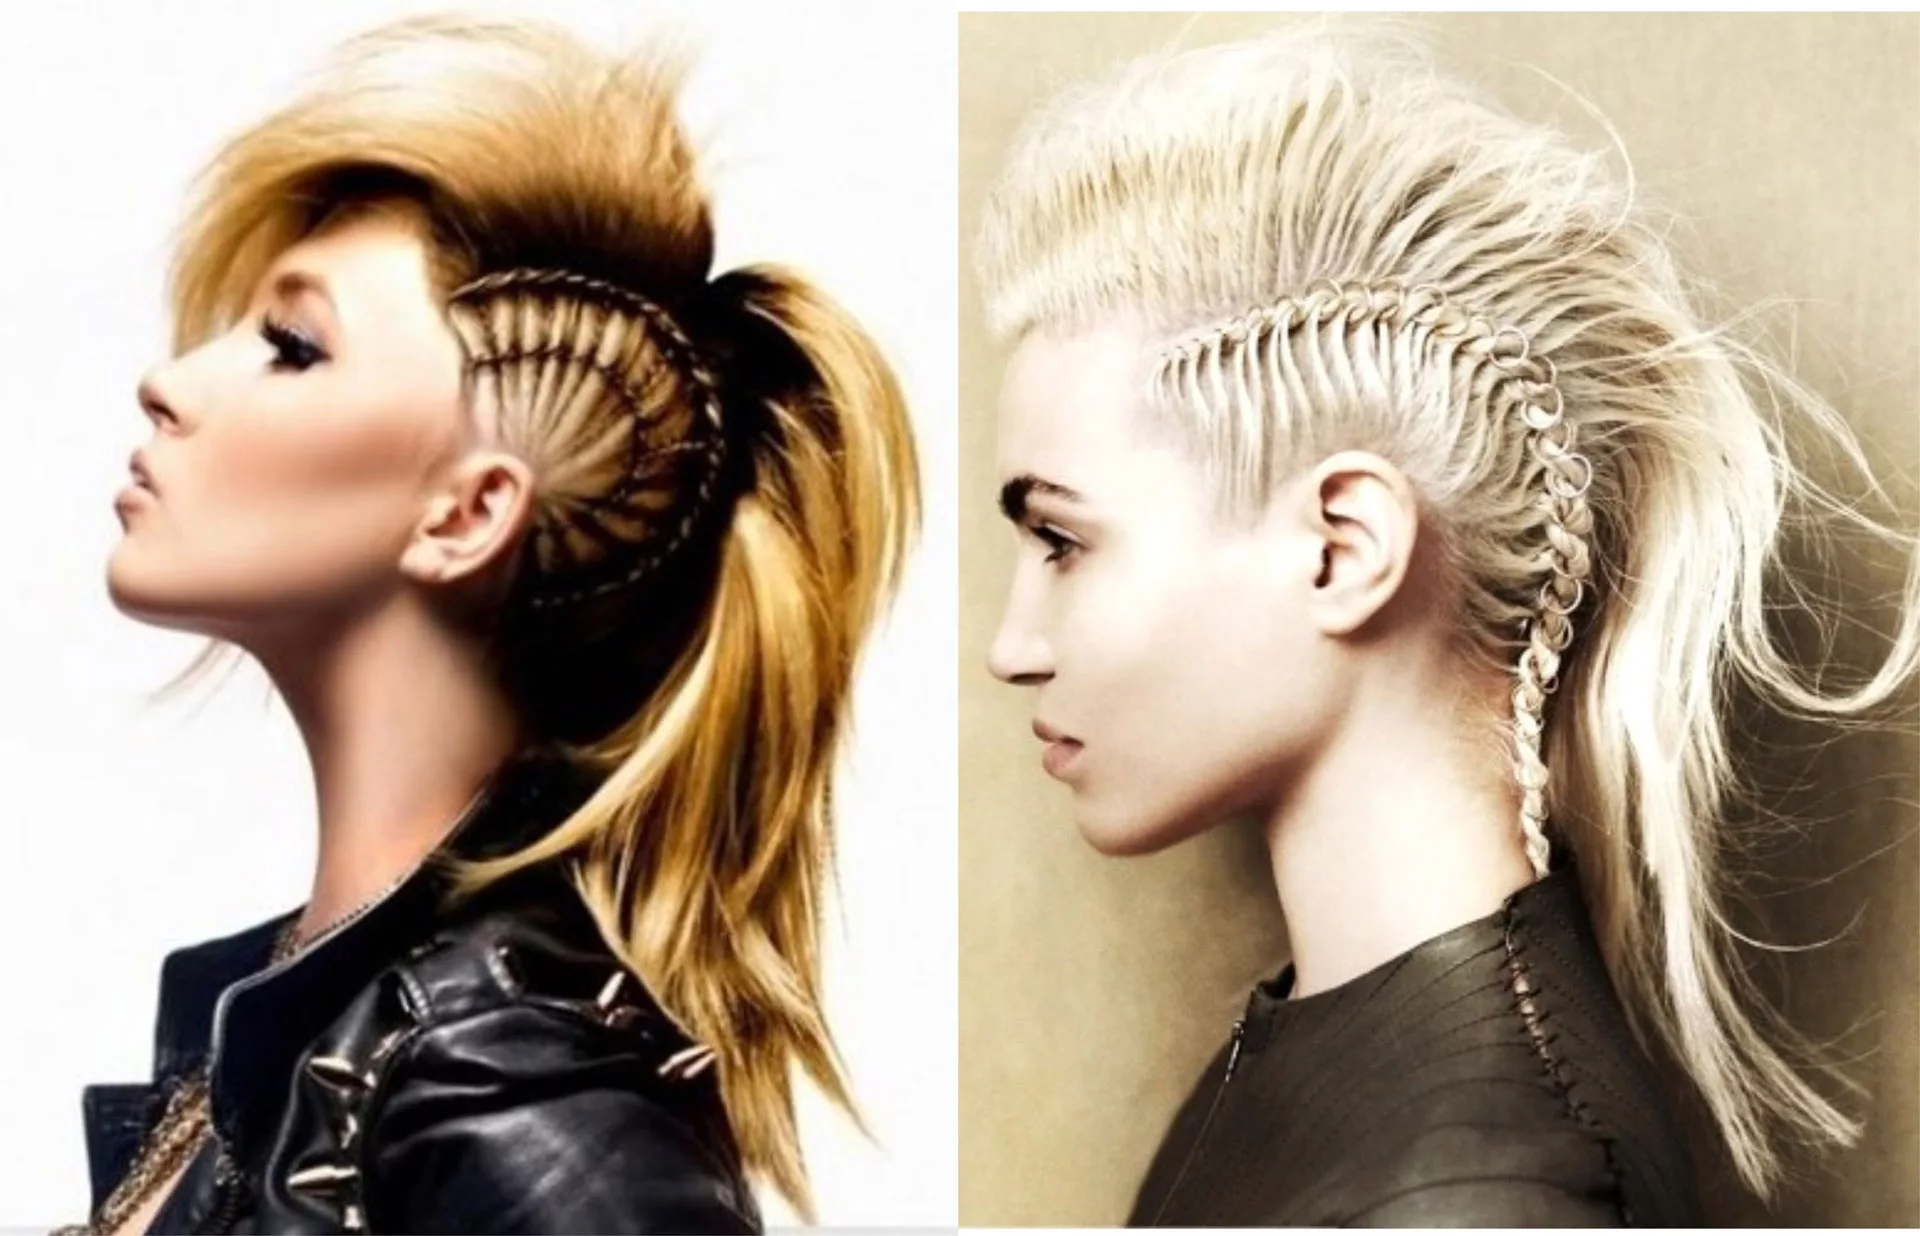 80 Mohawk Hairstyles for Women Who Want to Be Daring 4. fauxhawk-hairstyles. 